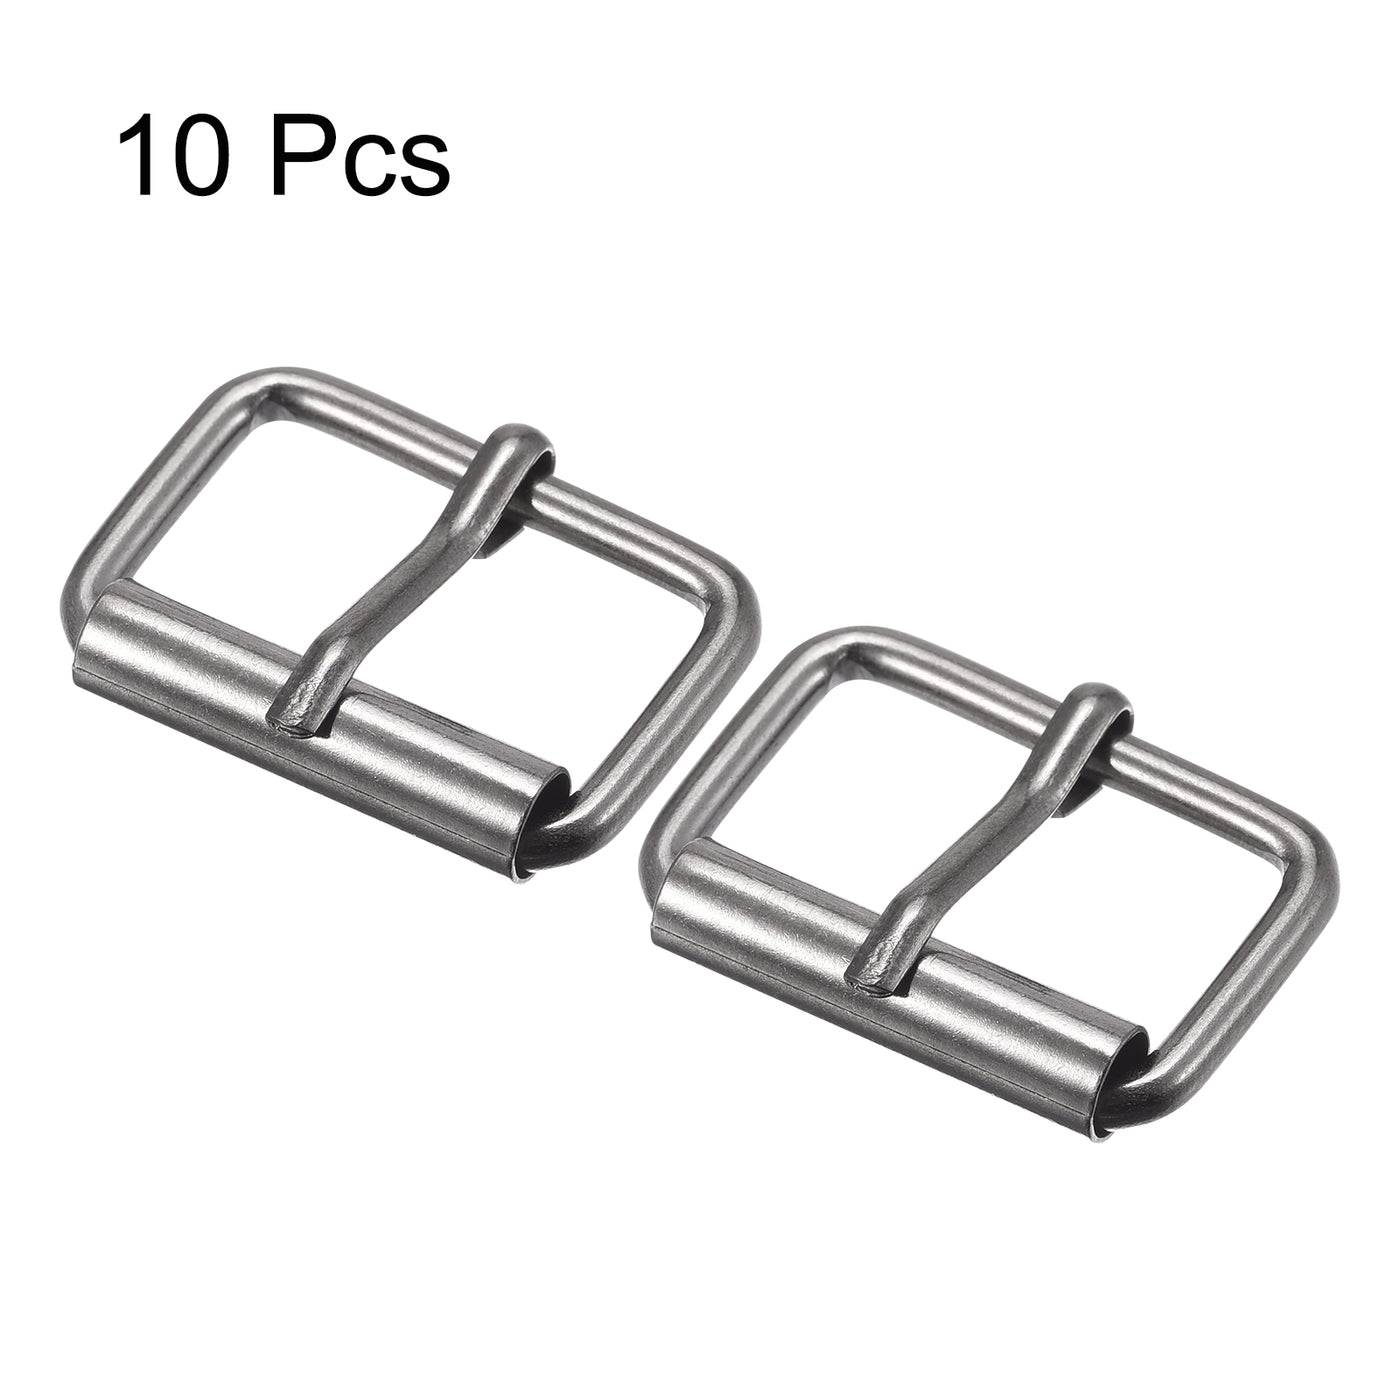 uxcell Uxcell 25mm(0.98") Metal Roller Buckles for Belts Bags Straps DIY Dark Gray 10pcs